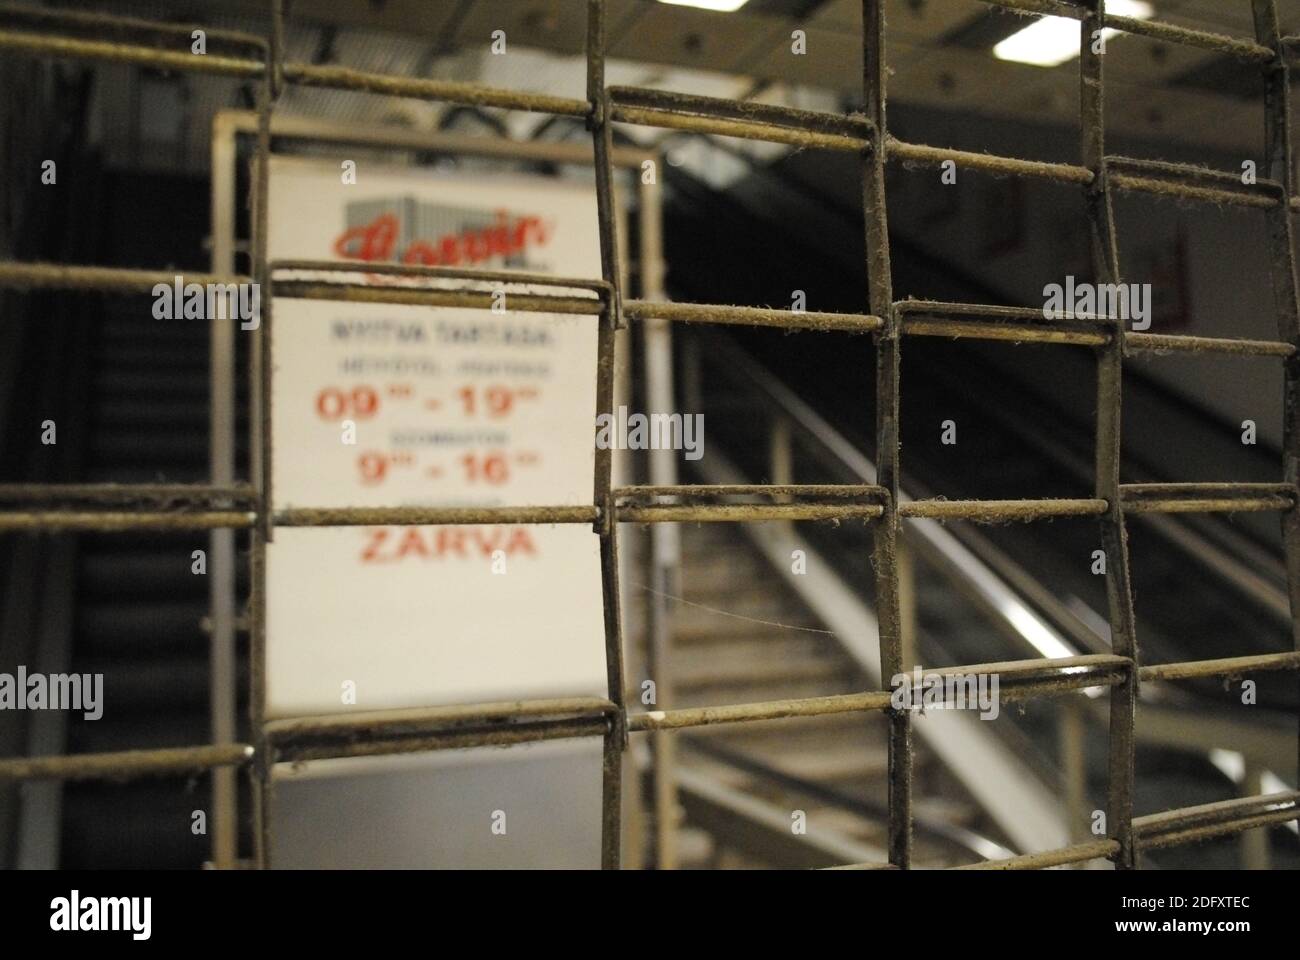 Escalators out of order in the Corvin department store, one of the oldest retail stores in Budapest. Currently closed, waiting for its renovation. Stock Photo